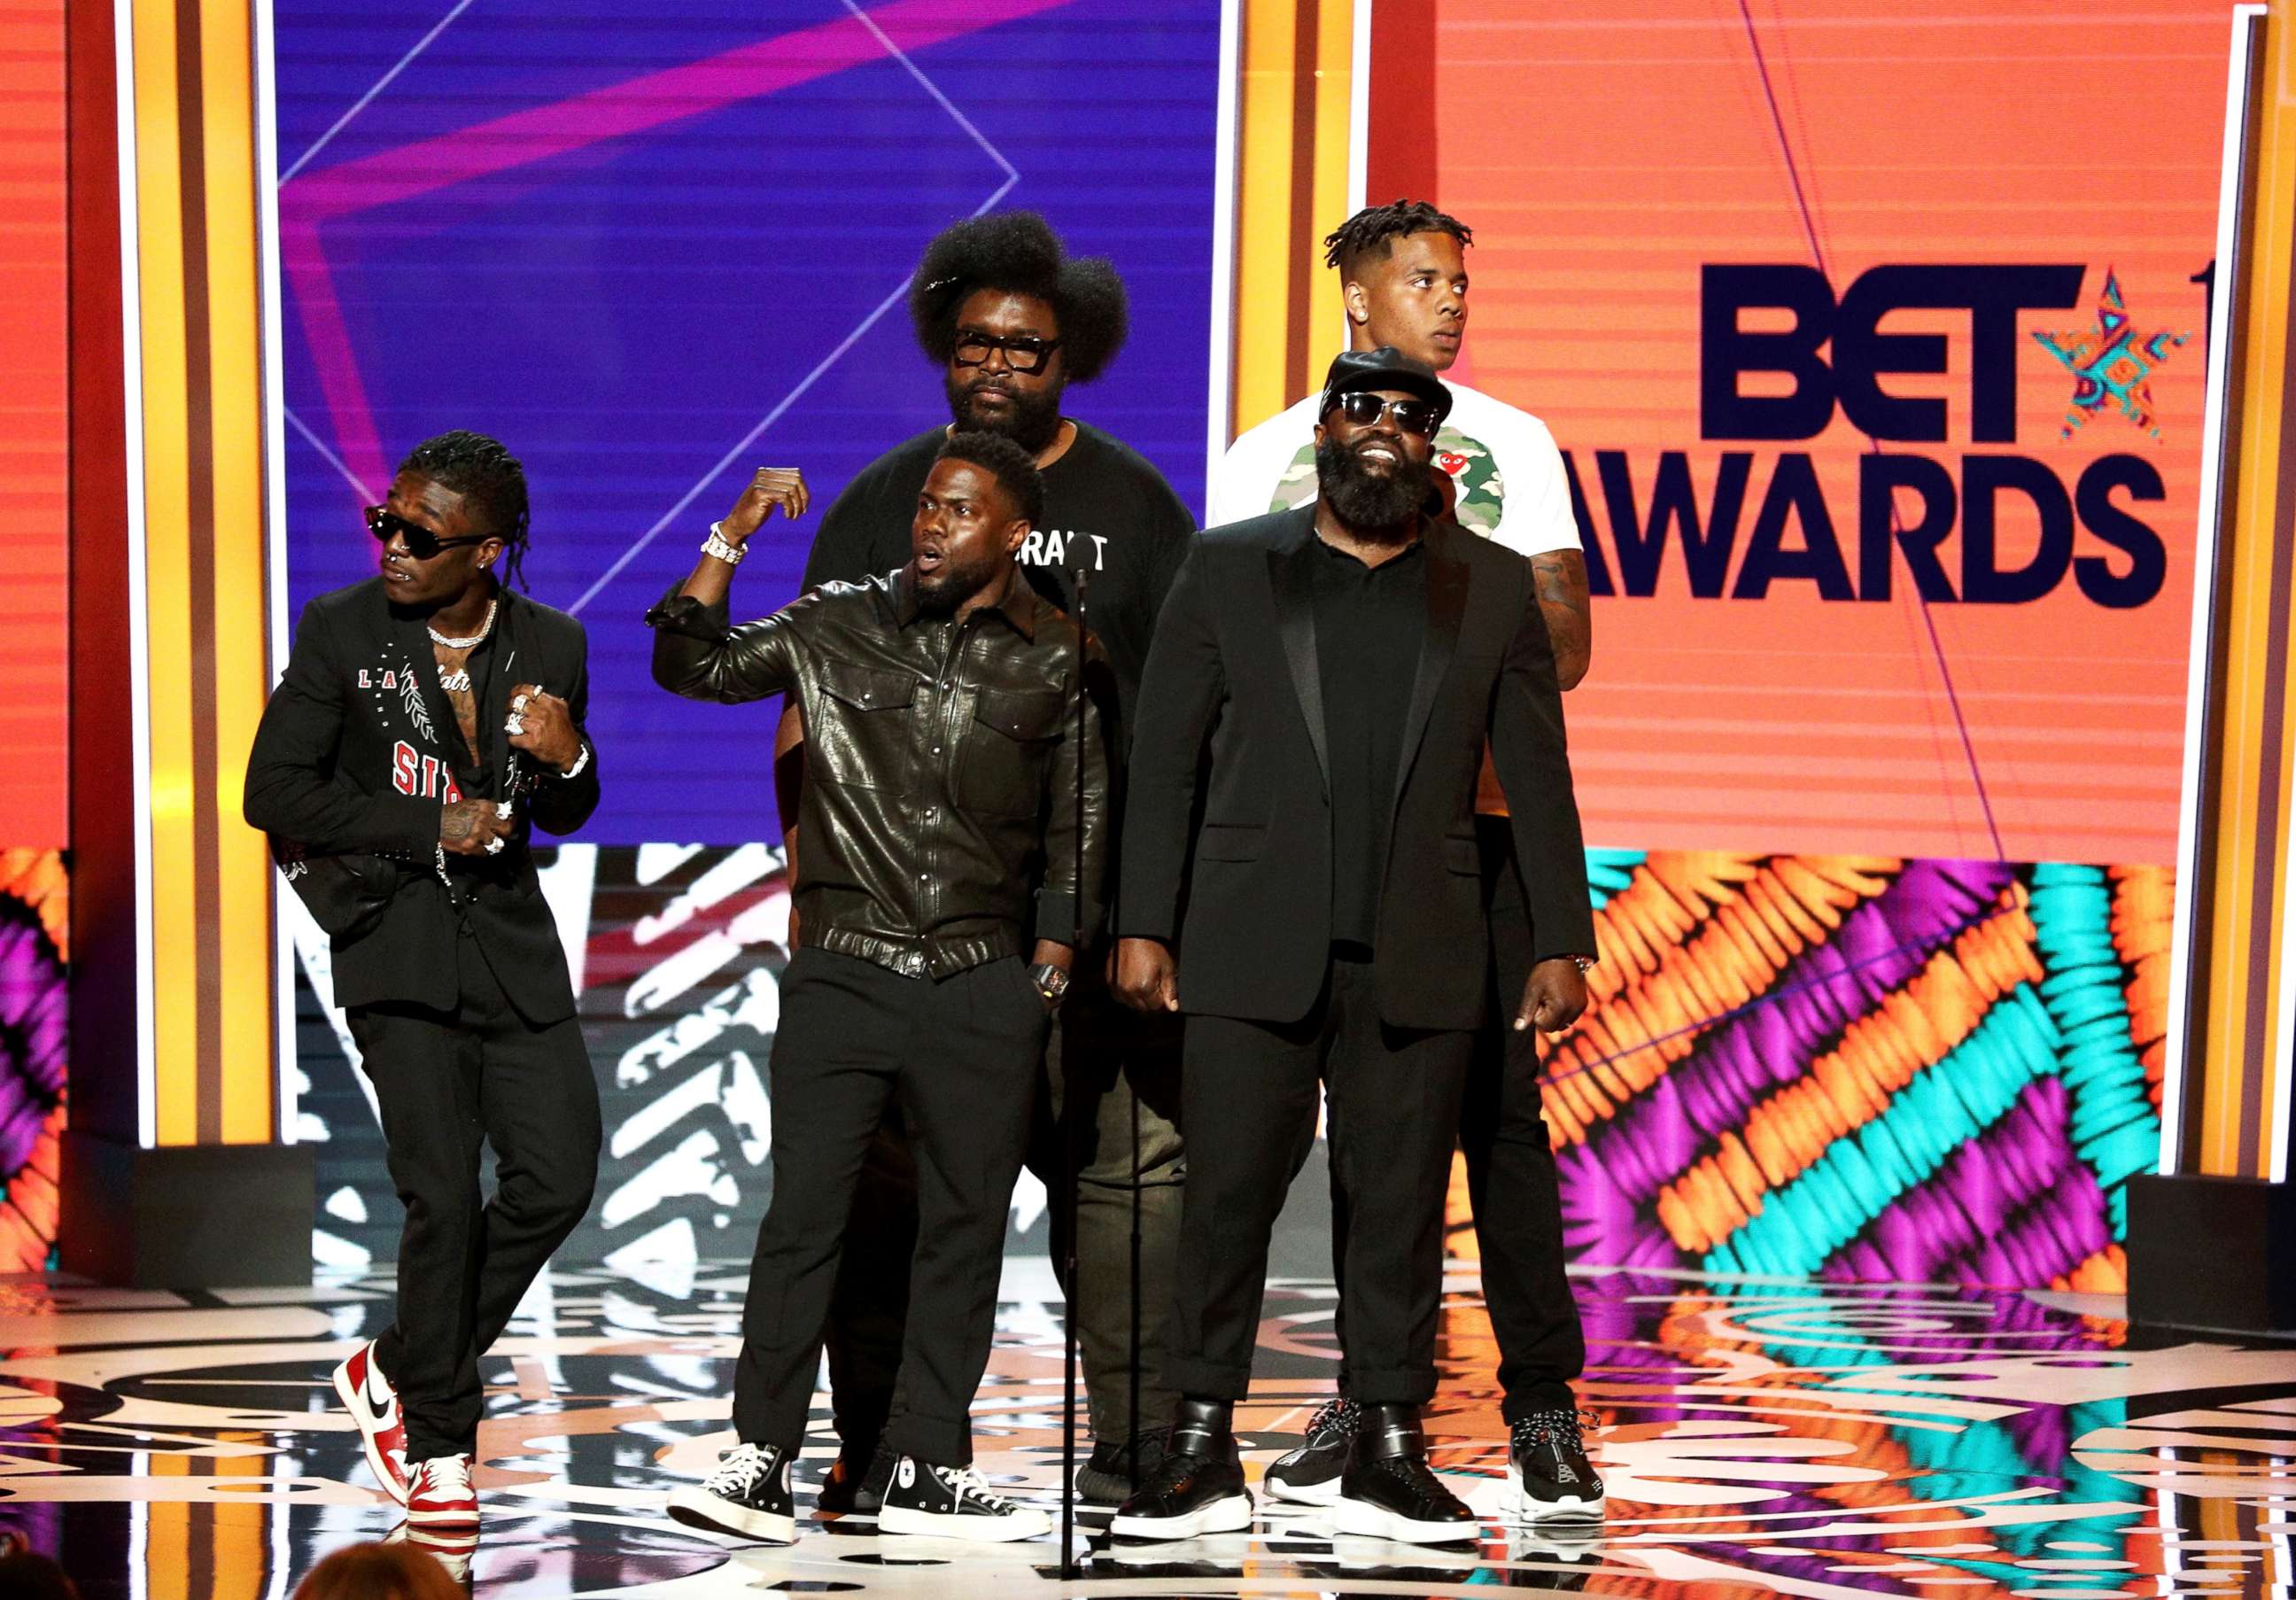 PHOTO: Lil Uzi Vert, Kevin Hart, Questlove, Black Thought, and Markelle Fultz speak onstage at the 2018 BET Awards at Microsoft Theater, June 24, 2018, in Los Angeles.